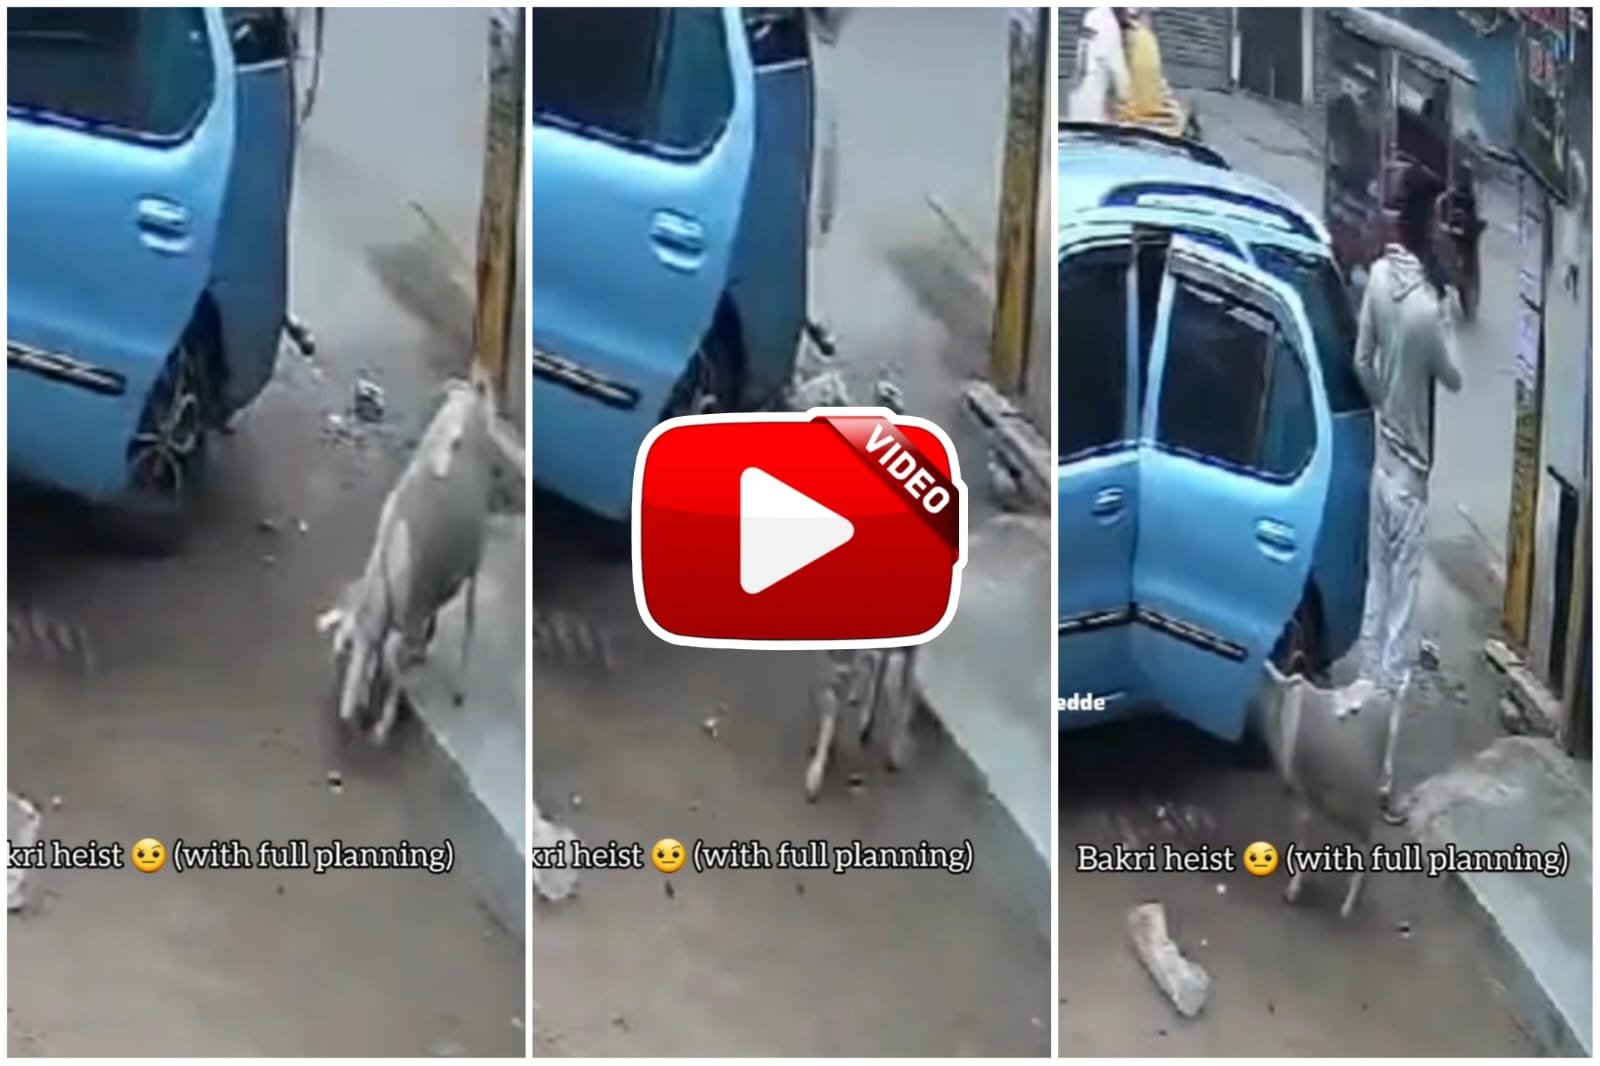 Bakri Ka Video - Thieves stole the goat in a very clever way